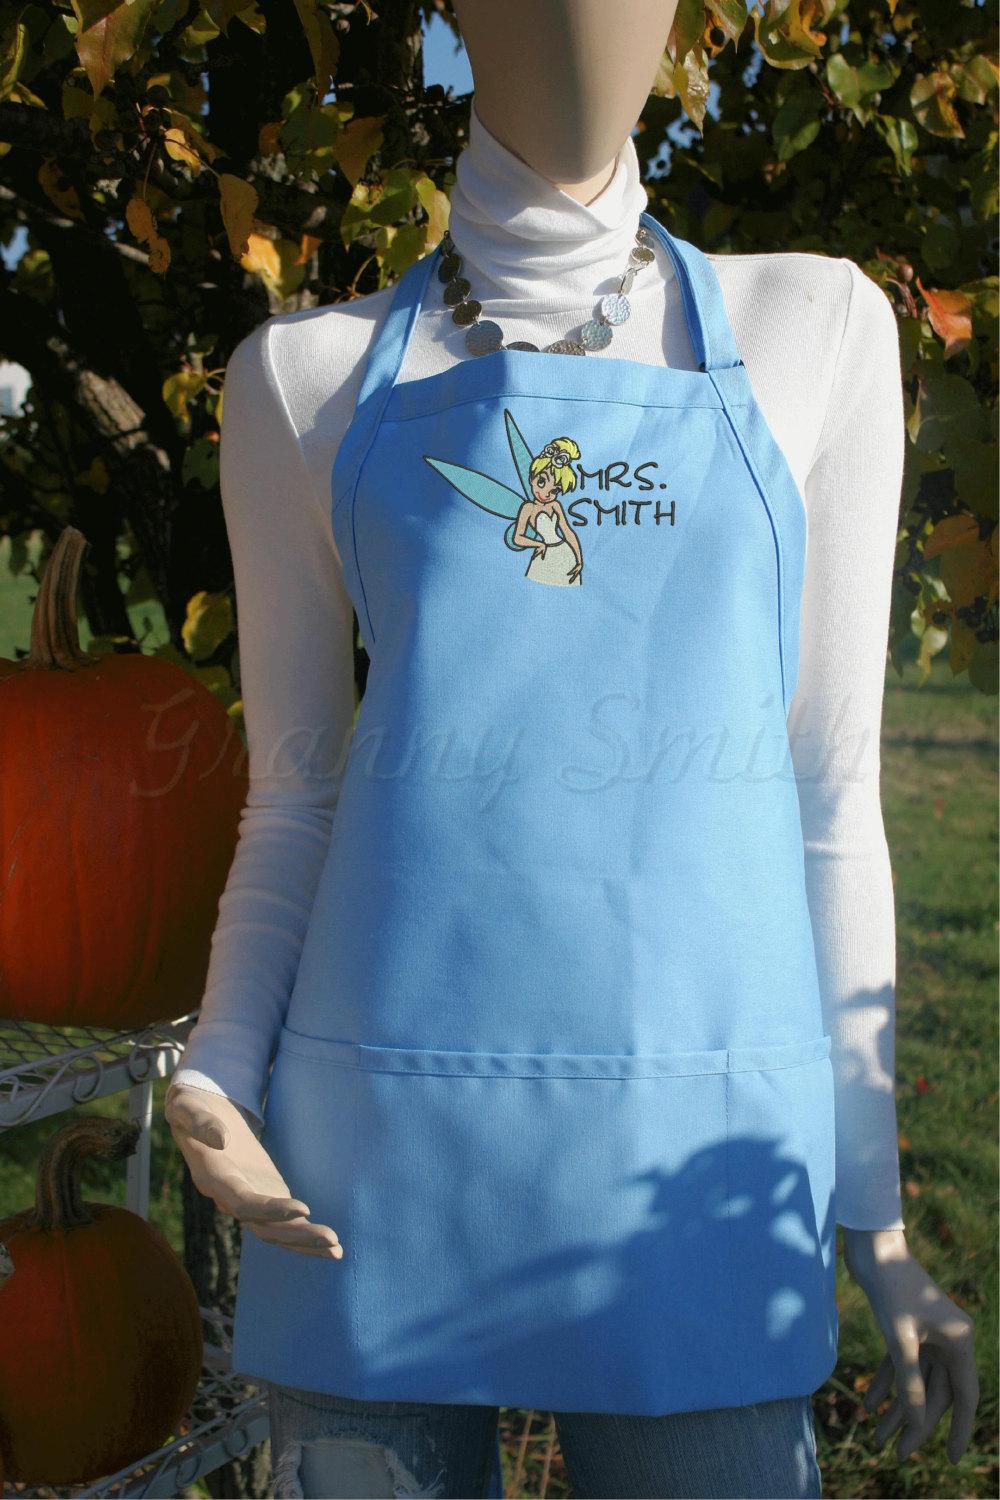 Tinkerbell embroidery design in a wedding dress apron — blue